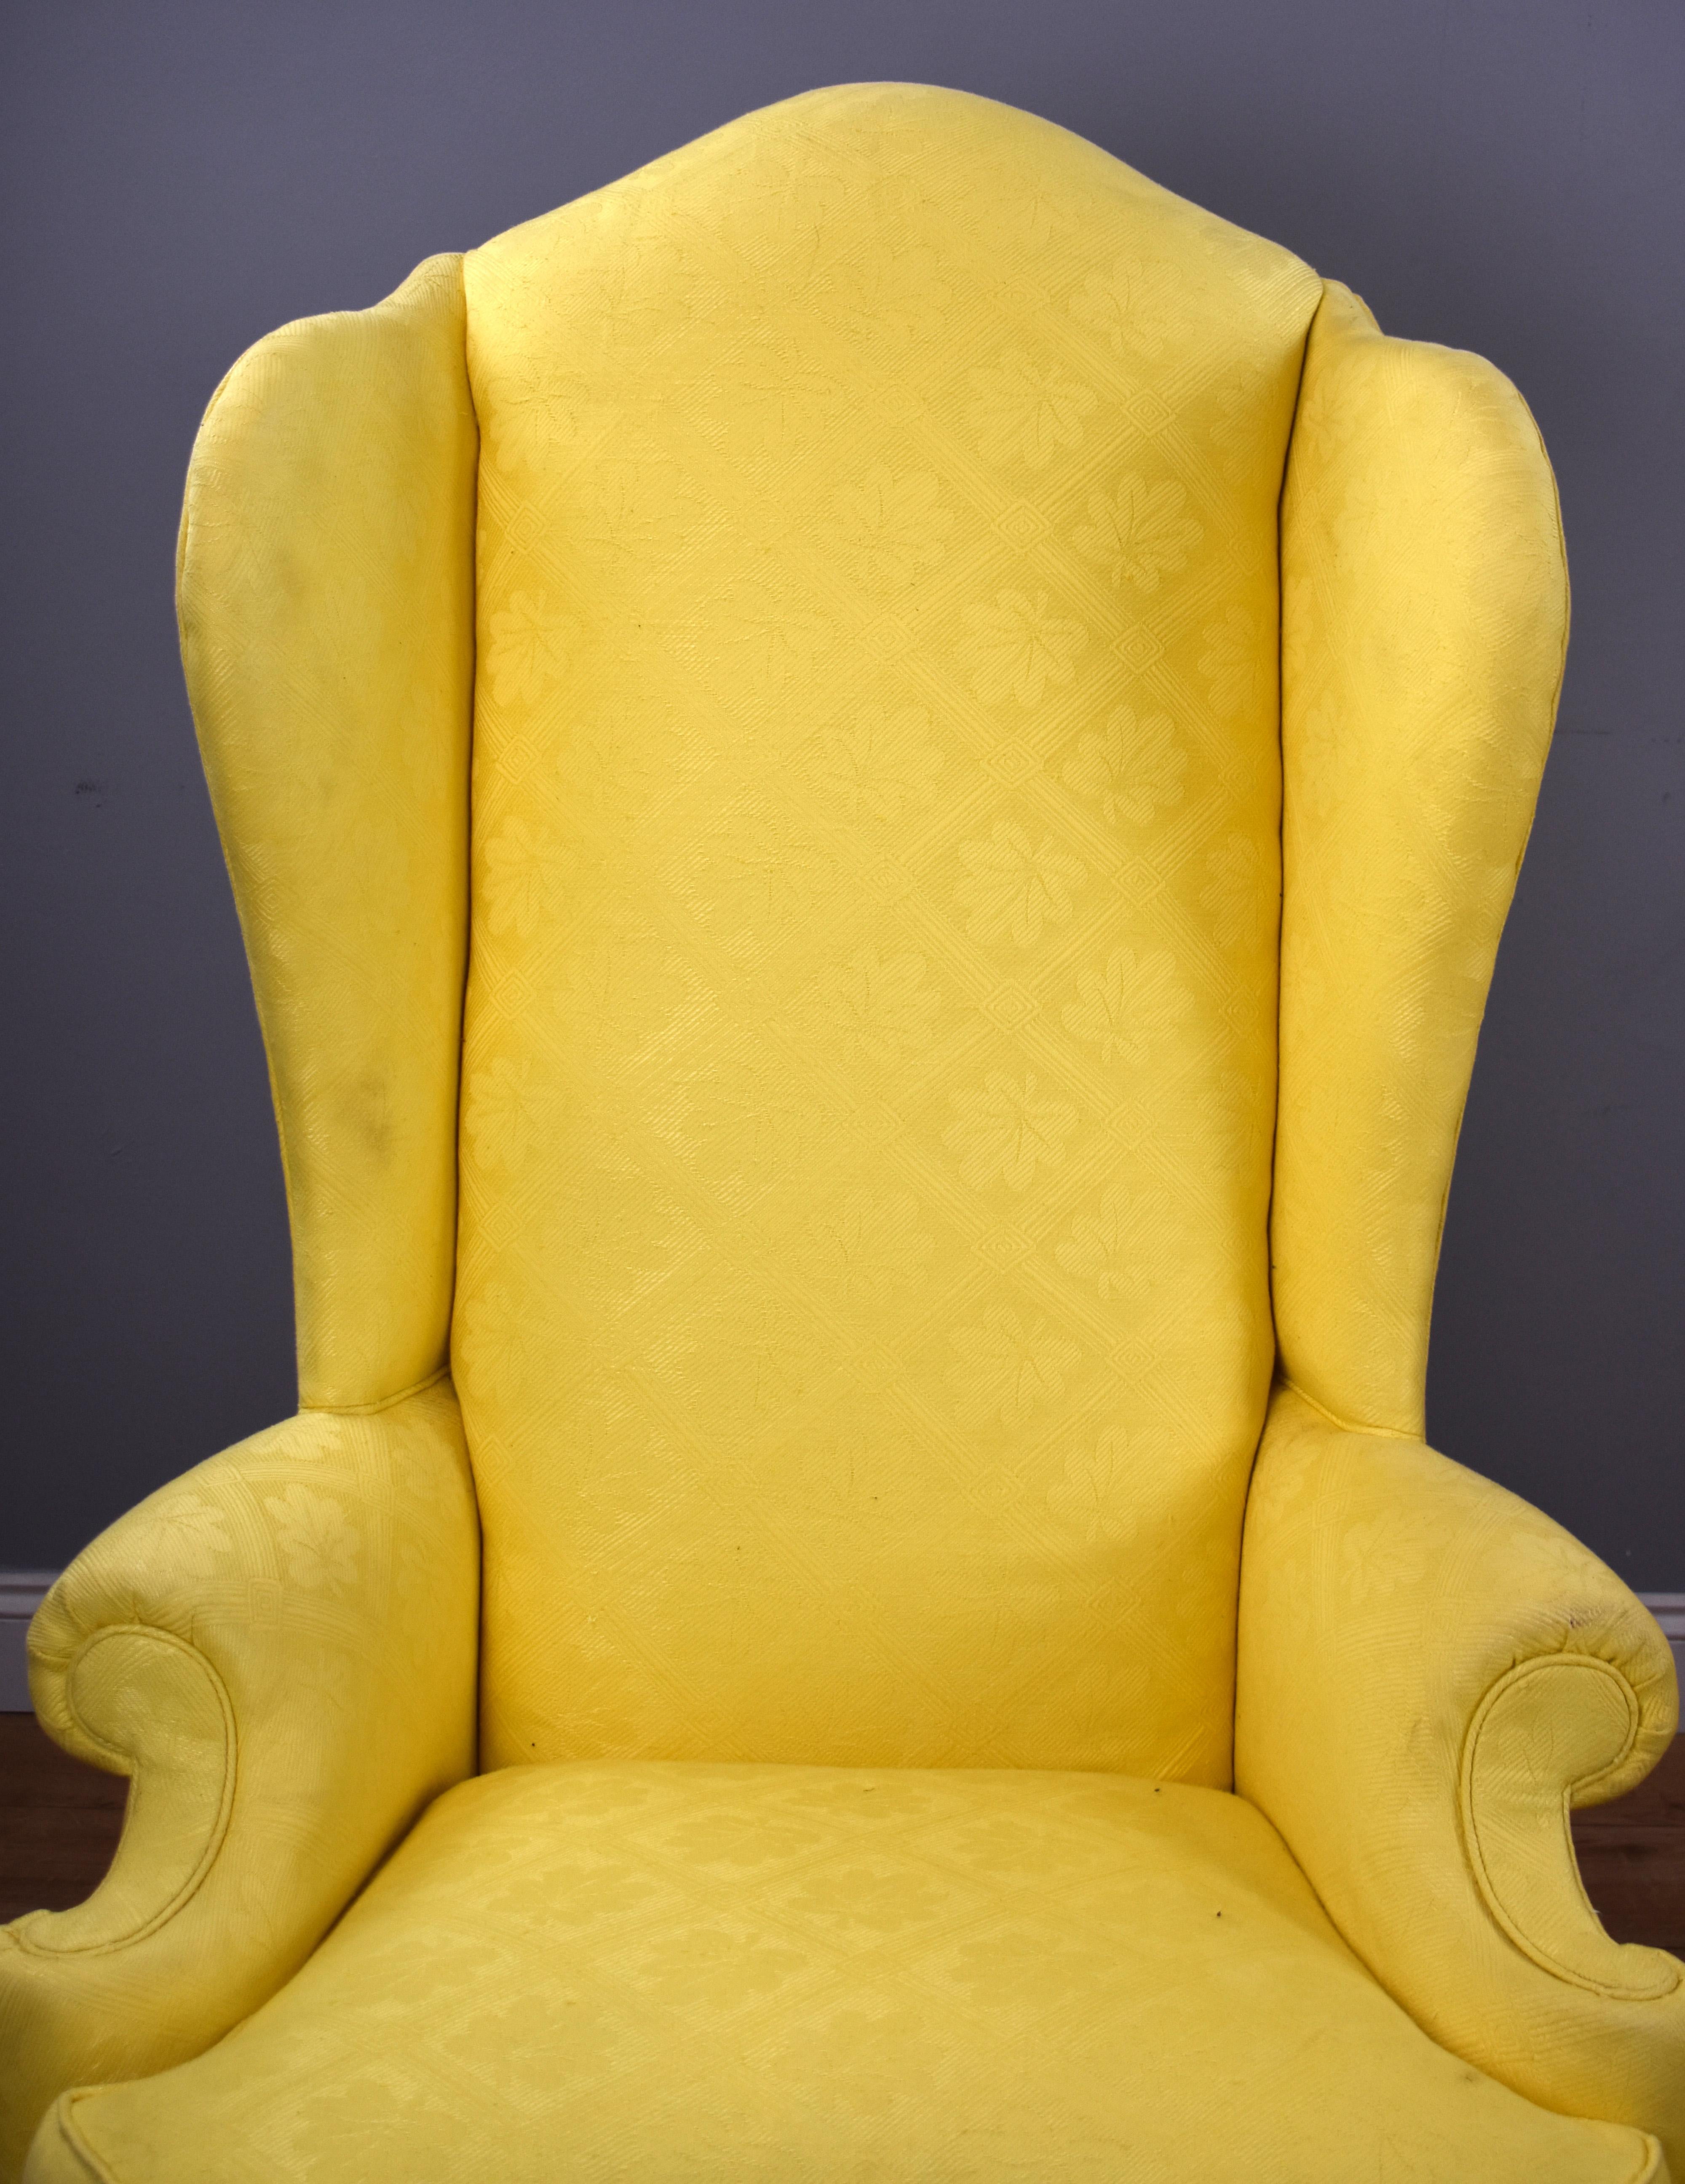 A pair of Queen Anne style wing chairs, opholstered in a yellow fabric and standing on elegant cabriole legs united by a stretcher with a carved finial in the centre. Both chairs are structurally sound and in good order, showing minor signs of wear